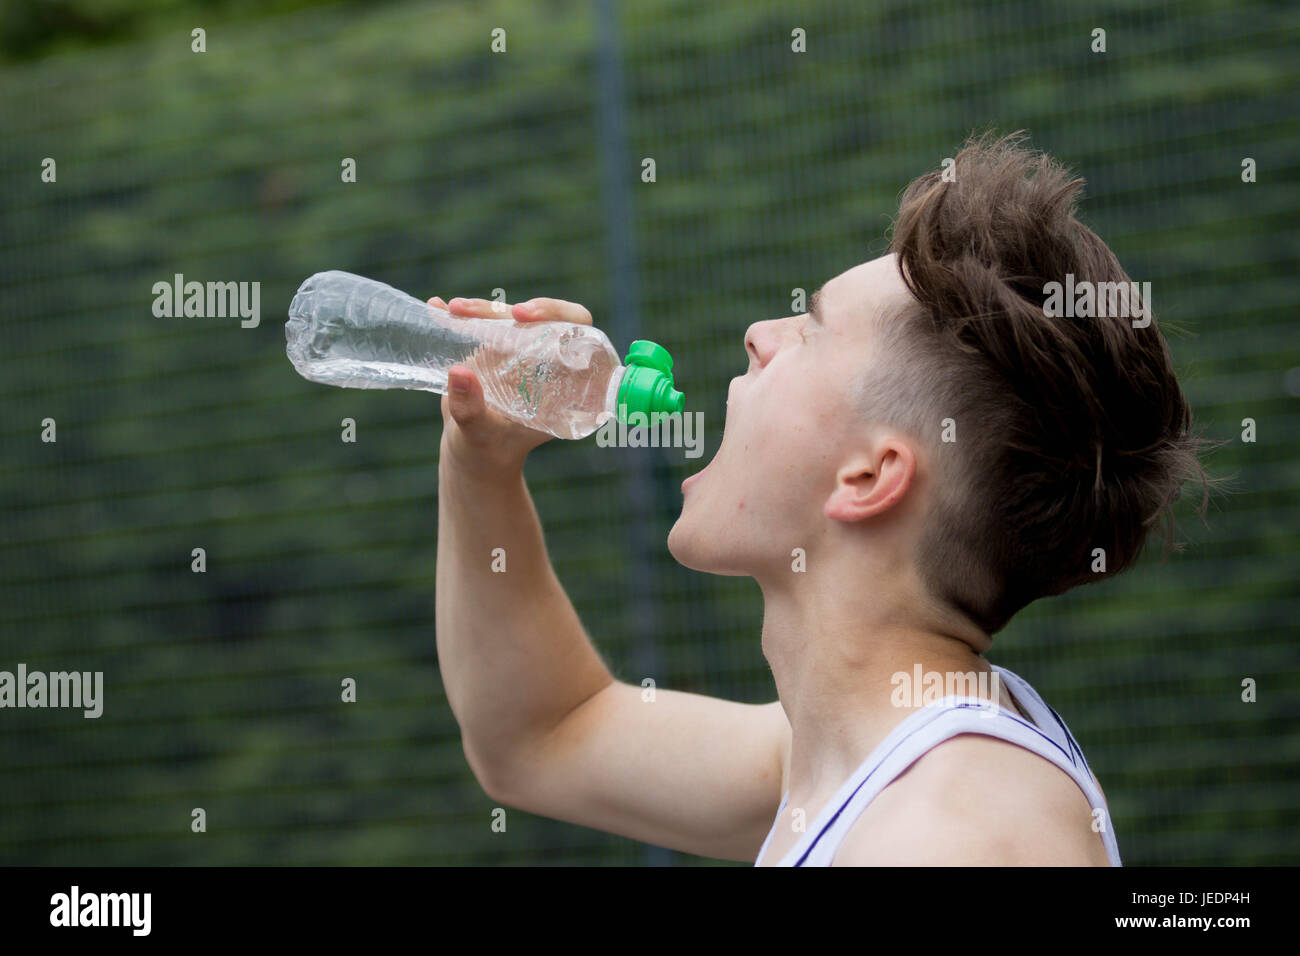 https://c8.alamy.com/comp/JEDP4H/teenage-boy-squirting-water-into-his-mouth-JEDP4H.jpg